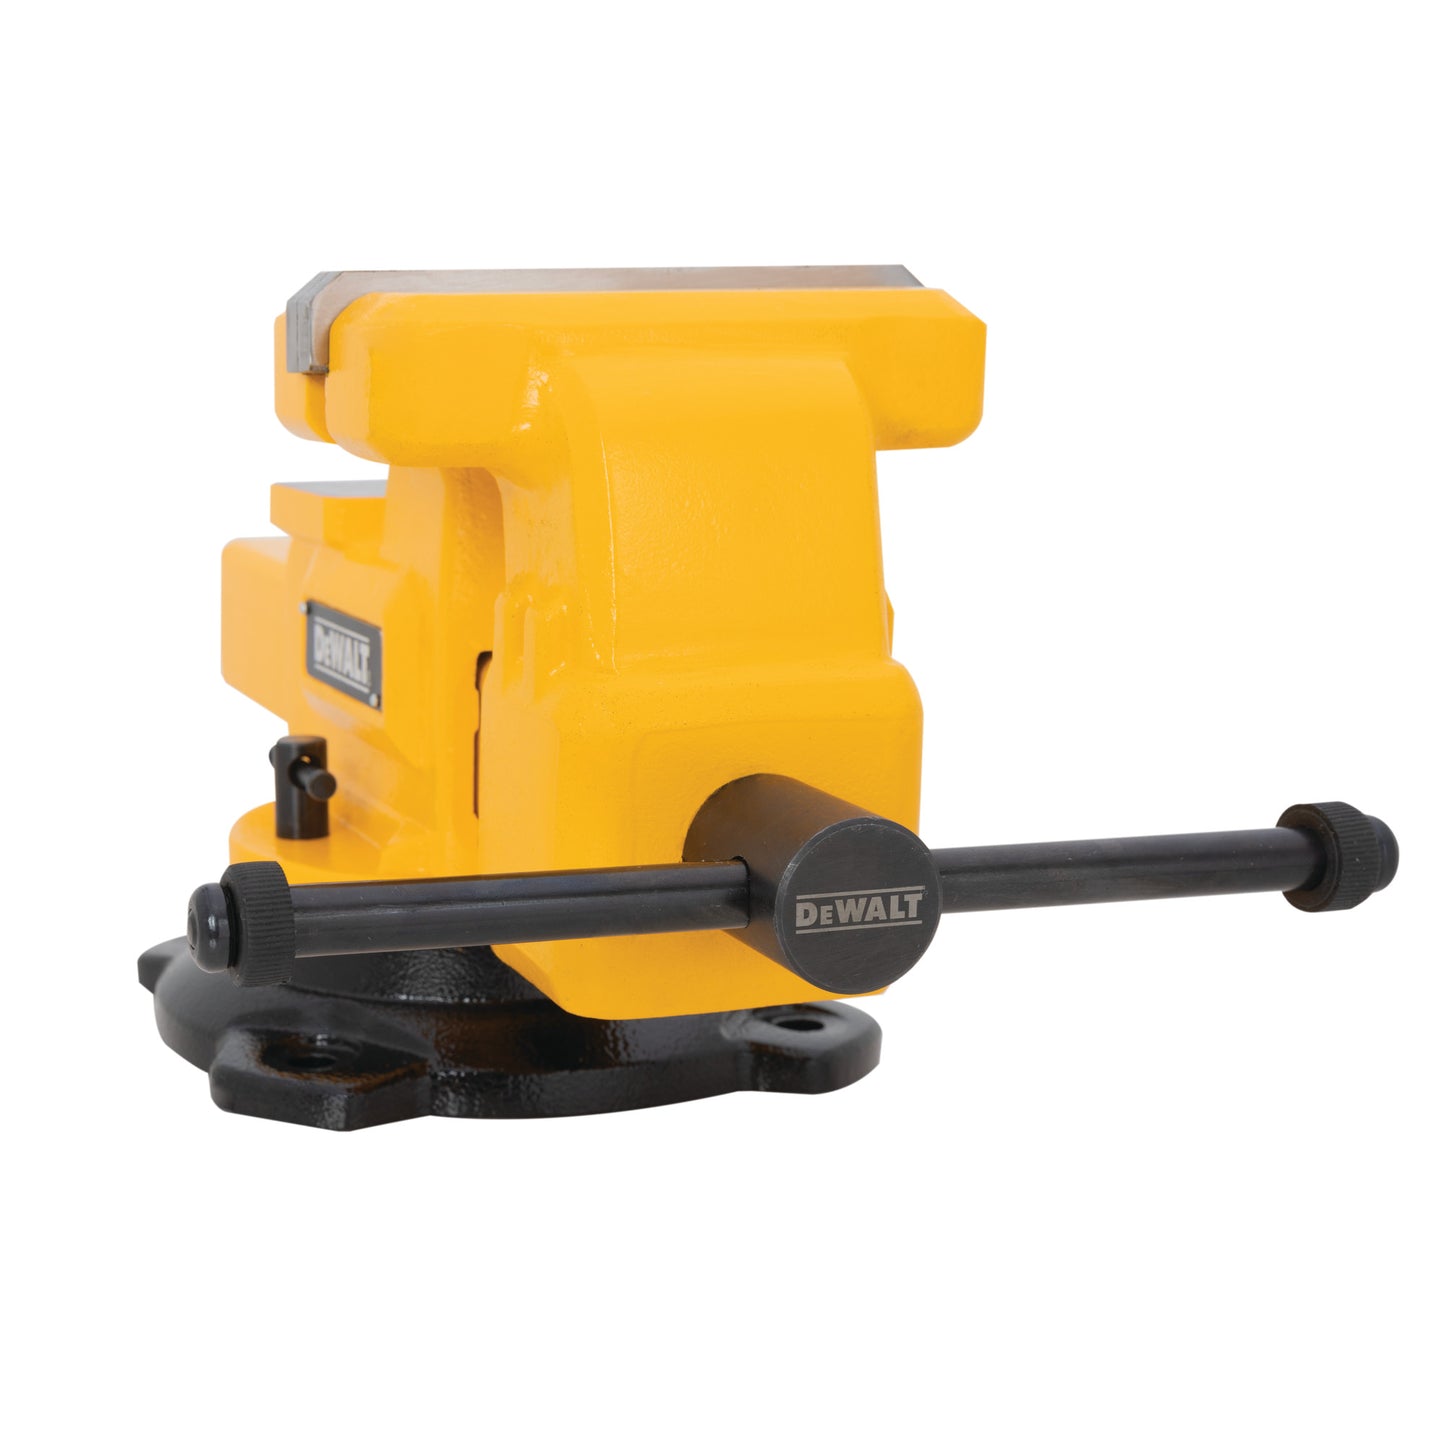 6-Inch 4400lb Capacity Bench Vise with Anvil in Yellow & Black